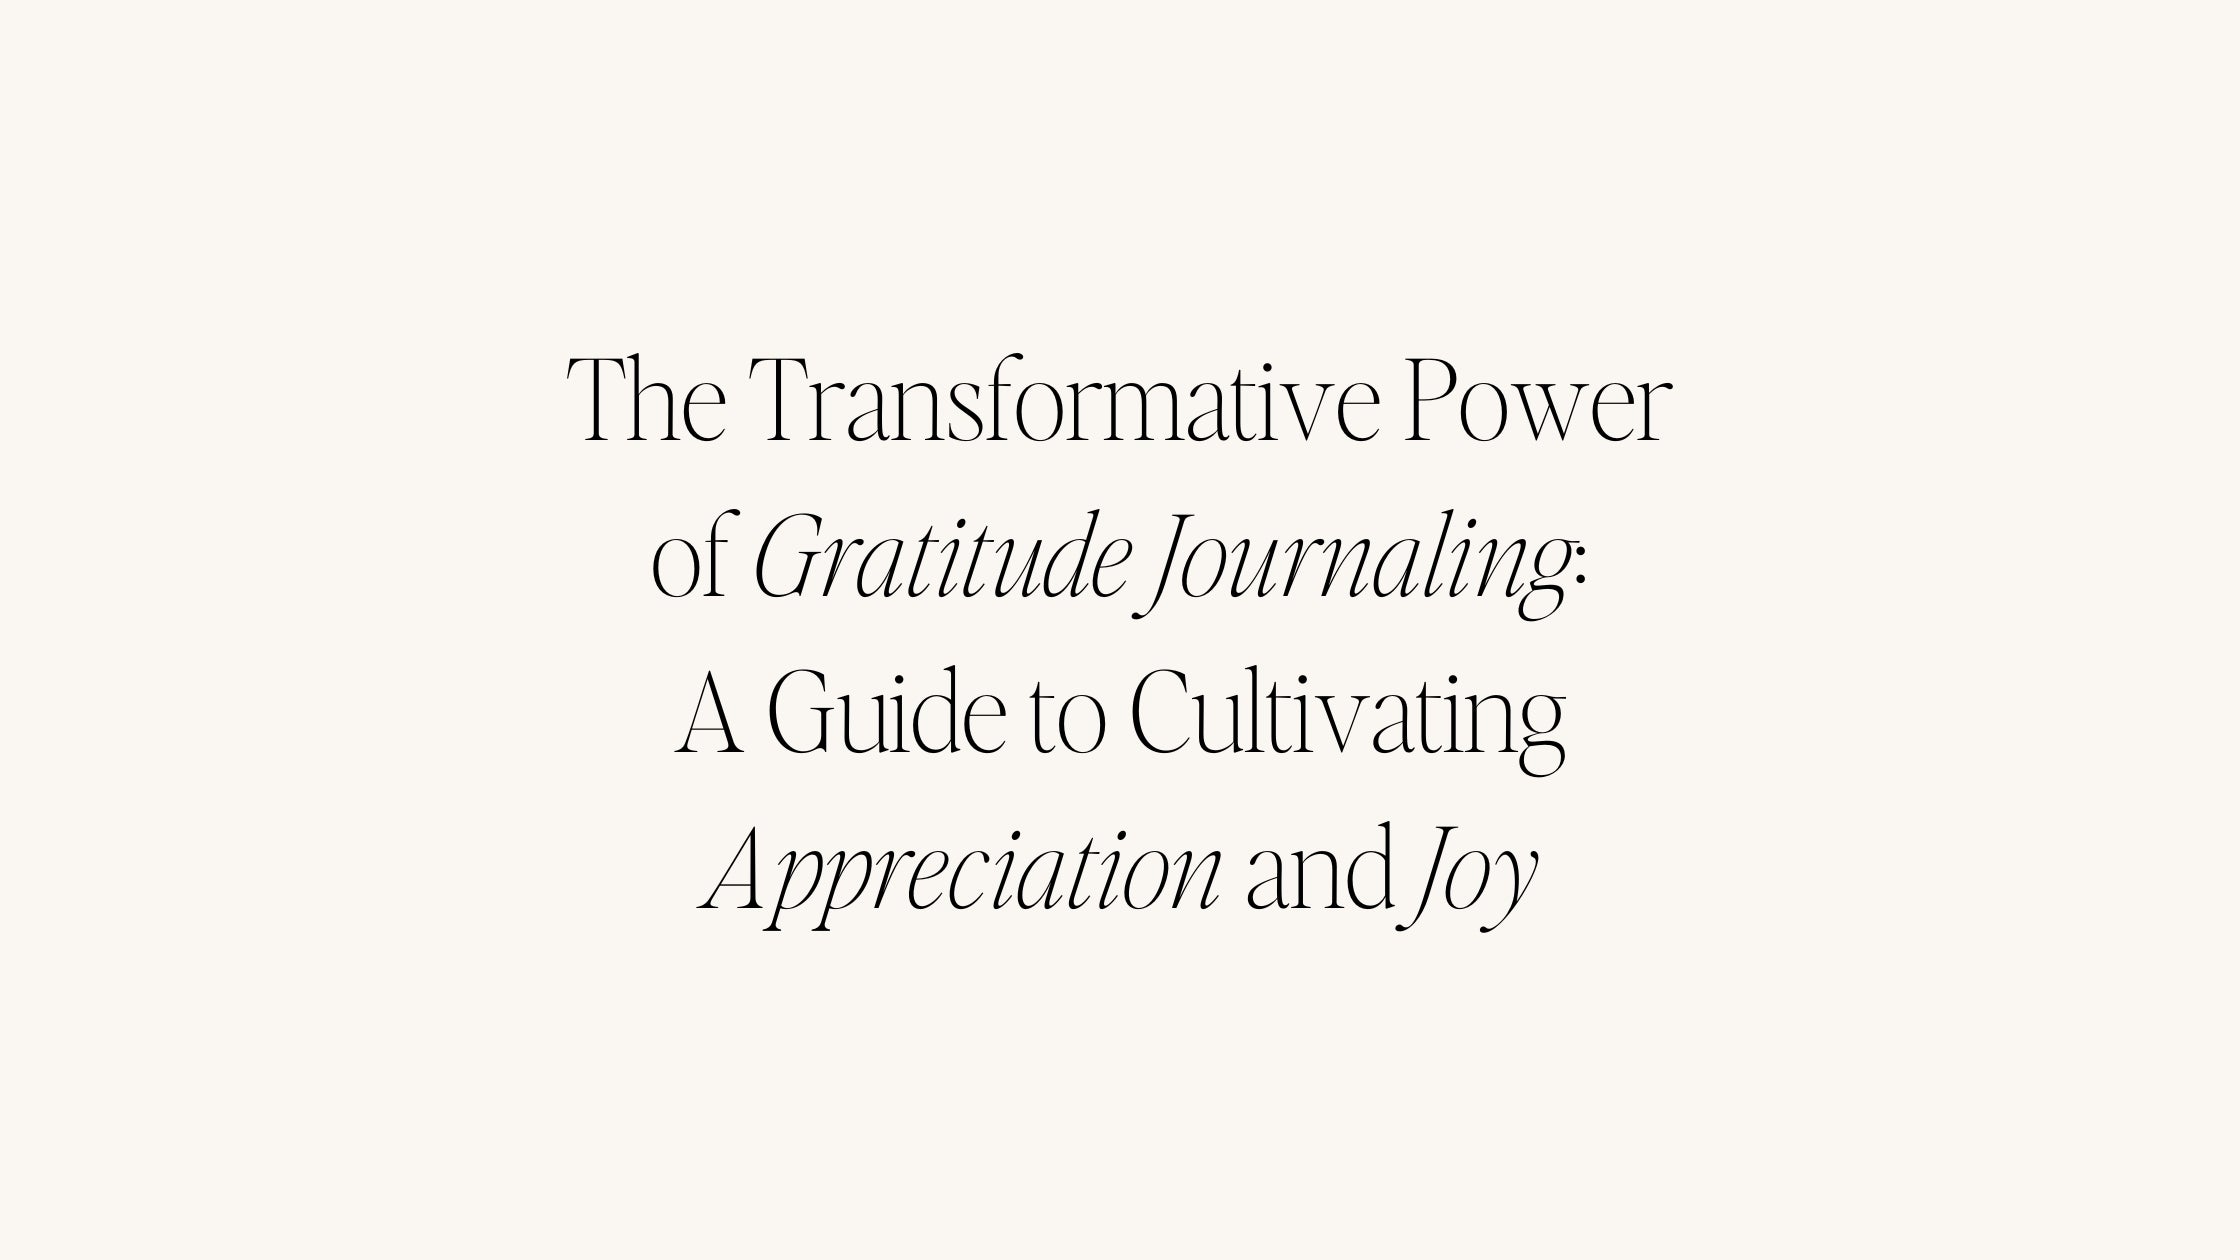 The Transformative Power of Gratitude Journaling: A Guide to Cultivating Appreciation and Joy